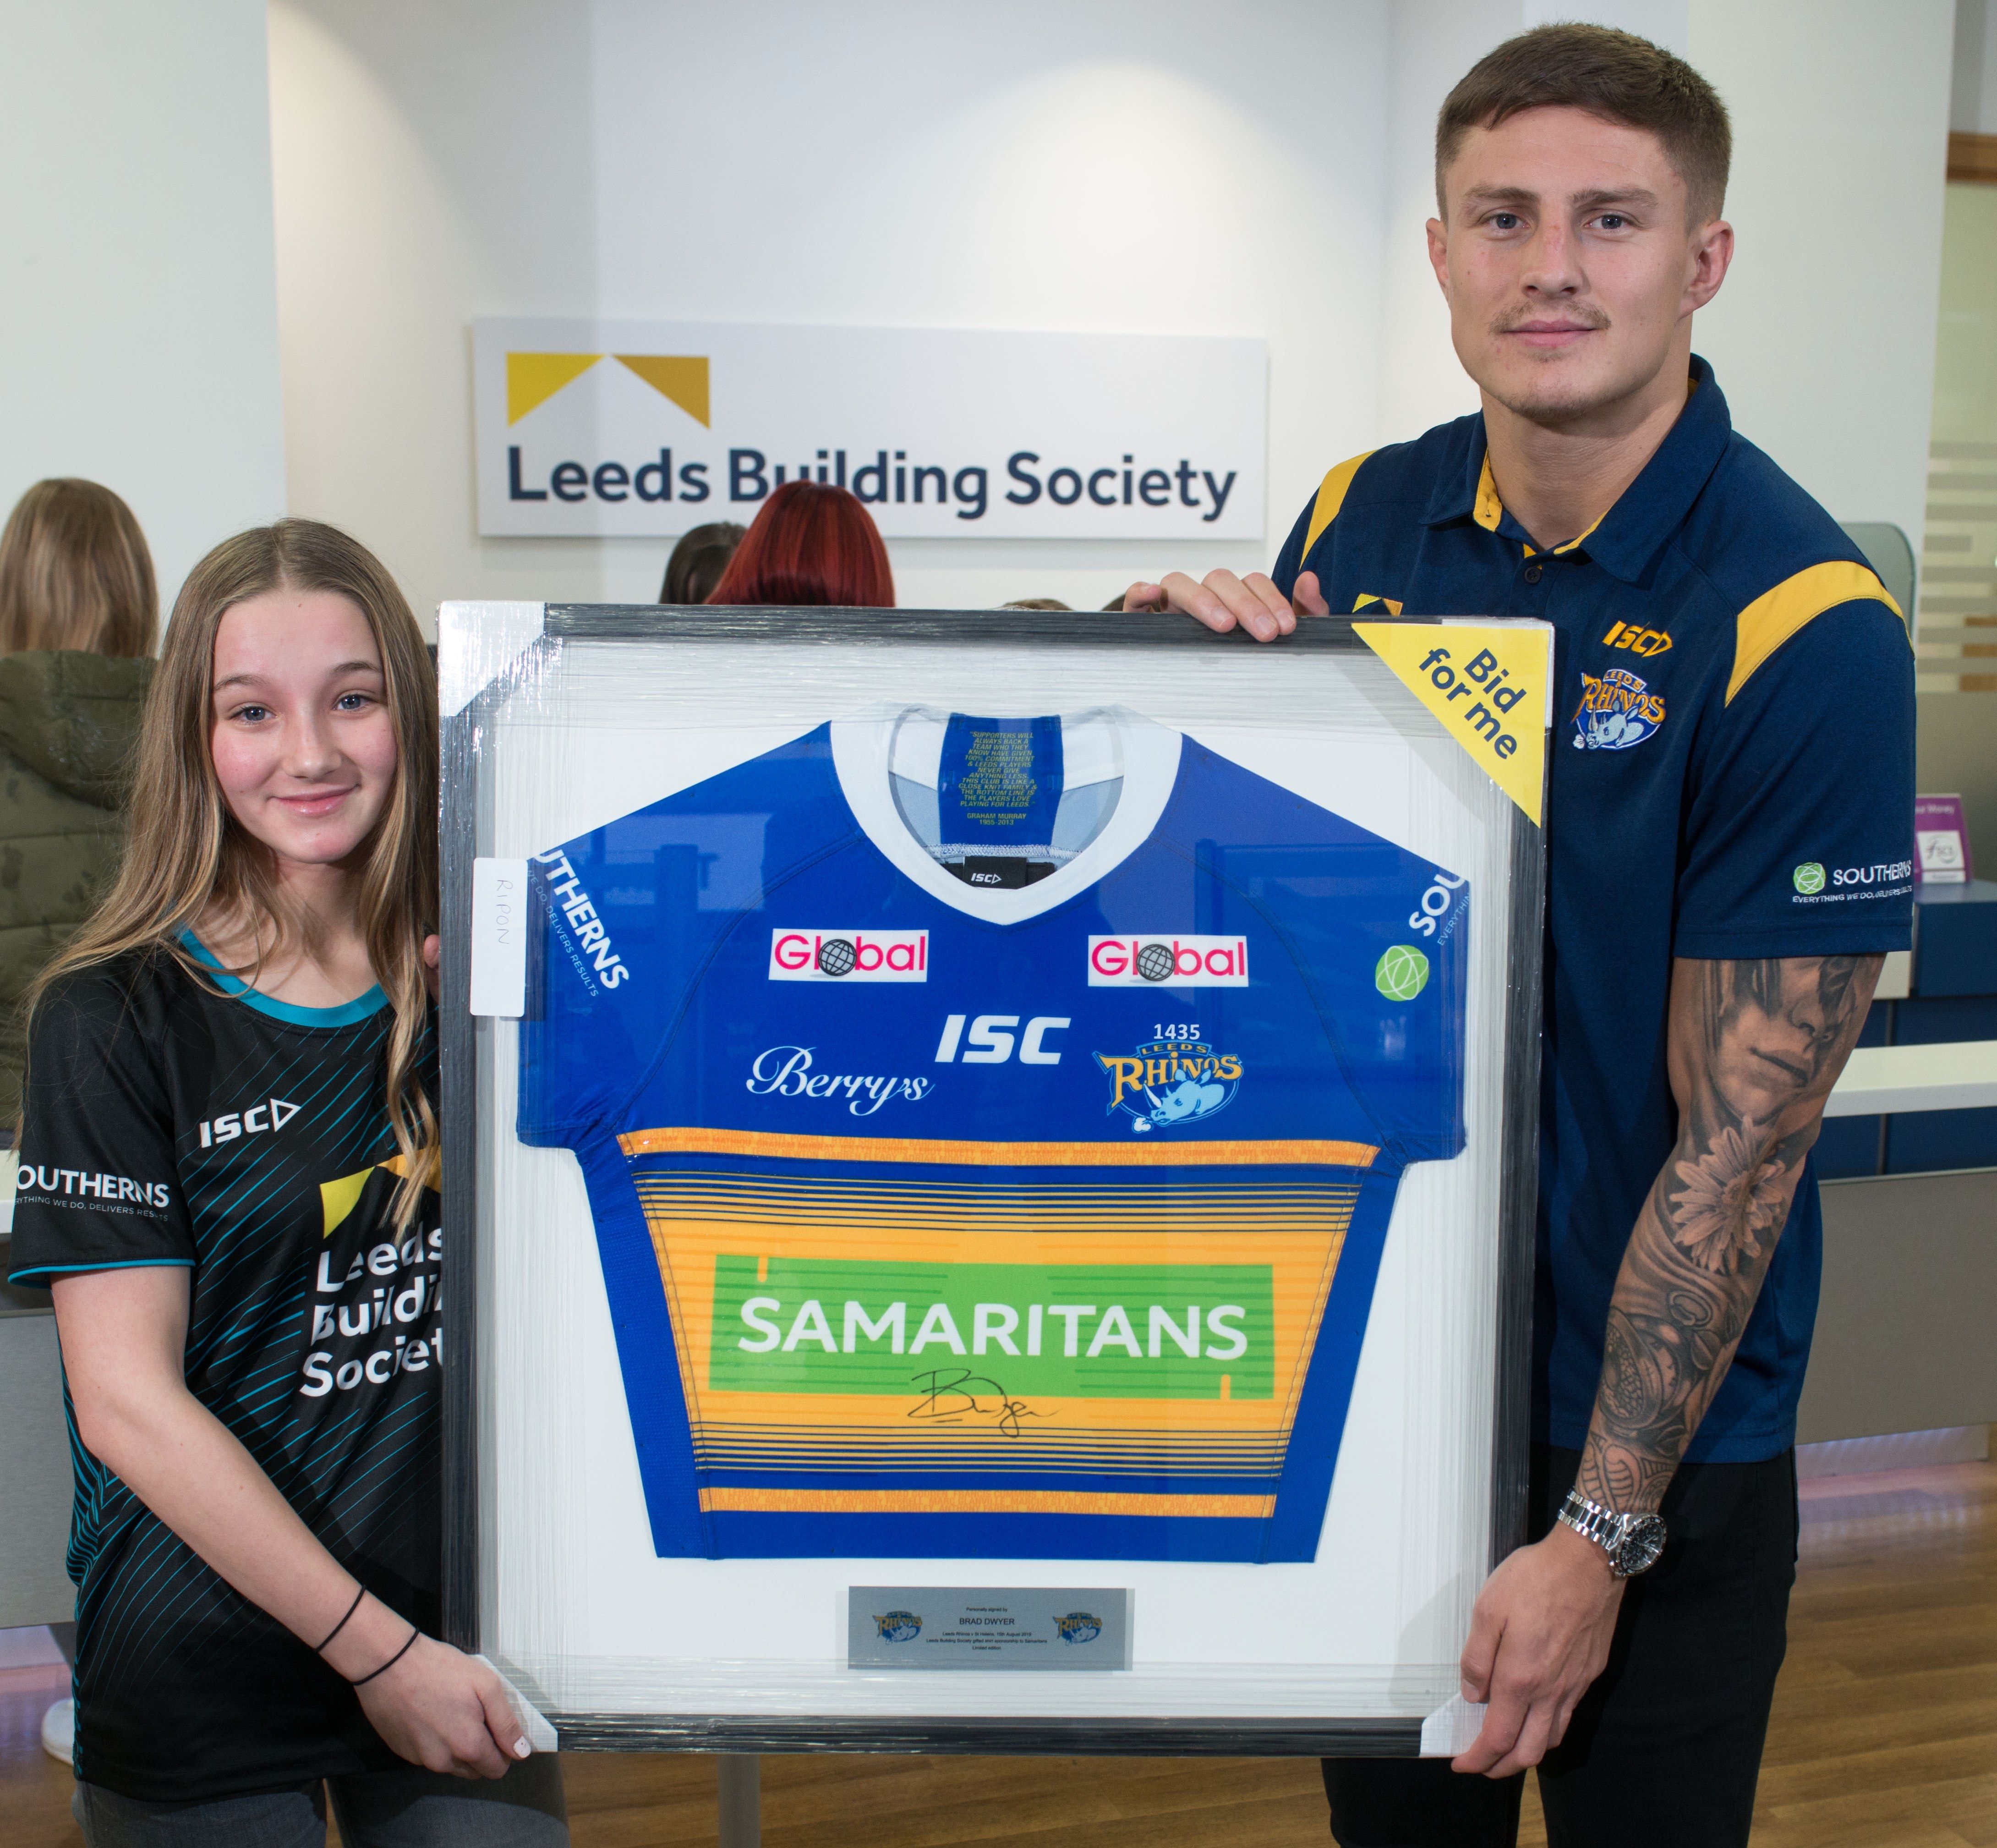 Liam Sutcliffe present the limited edition Samaritans shirt to Emily Blyfield